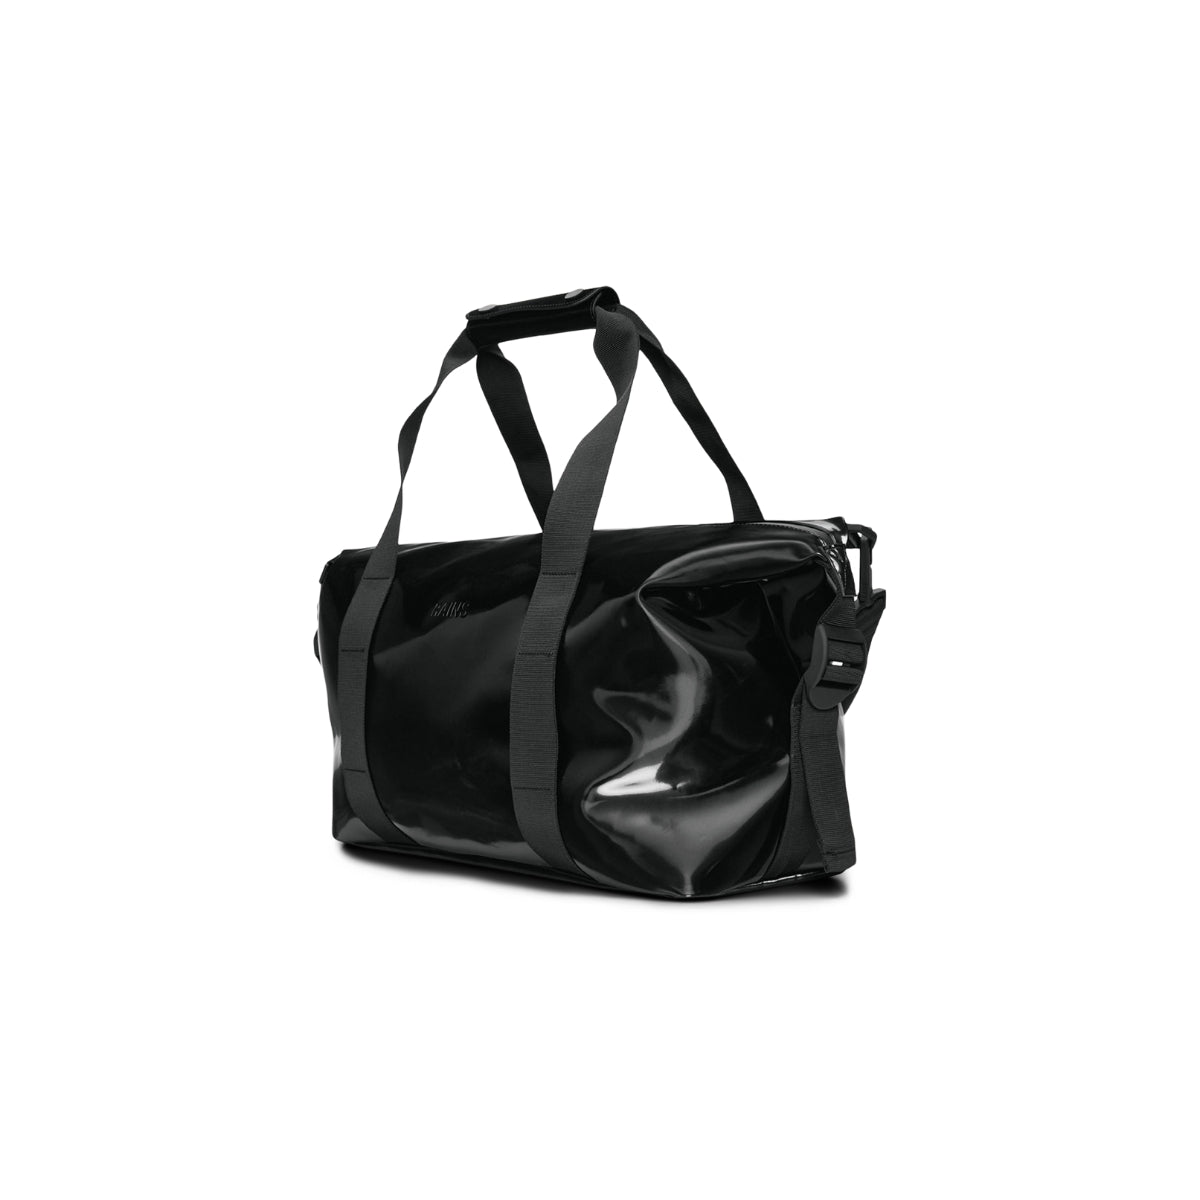 Rains Hilo Weekend Bag Small in Night